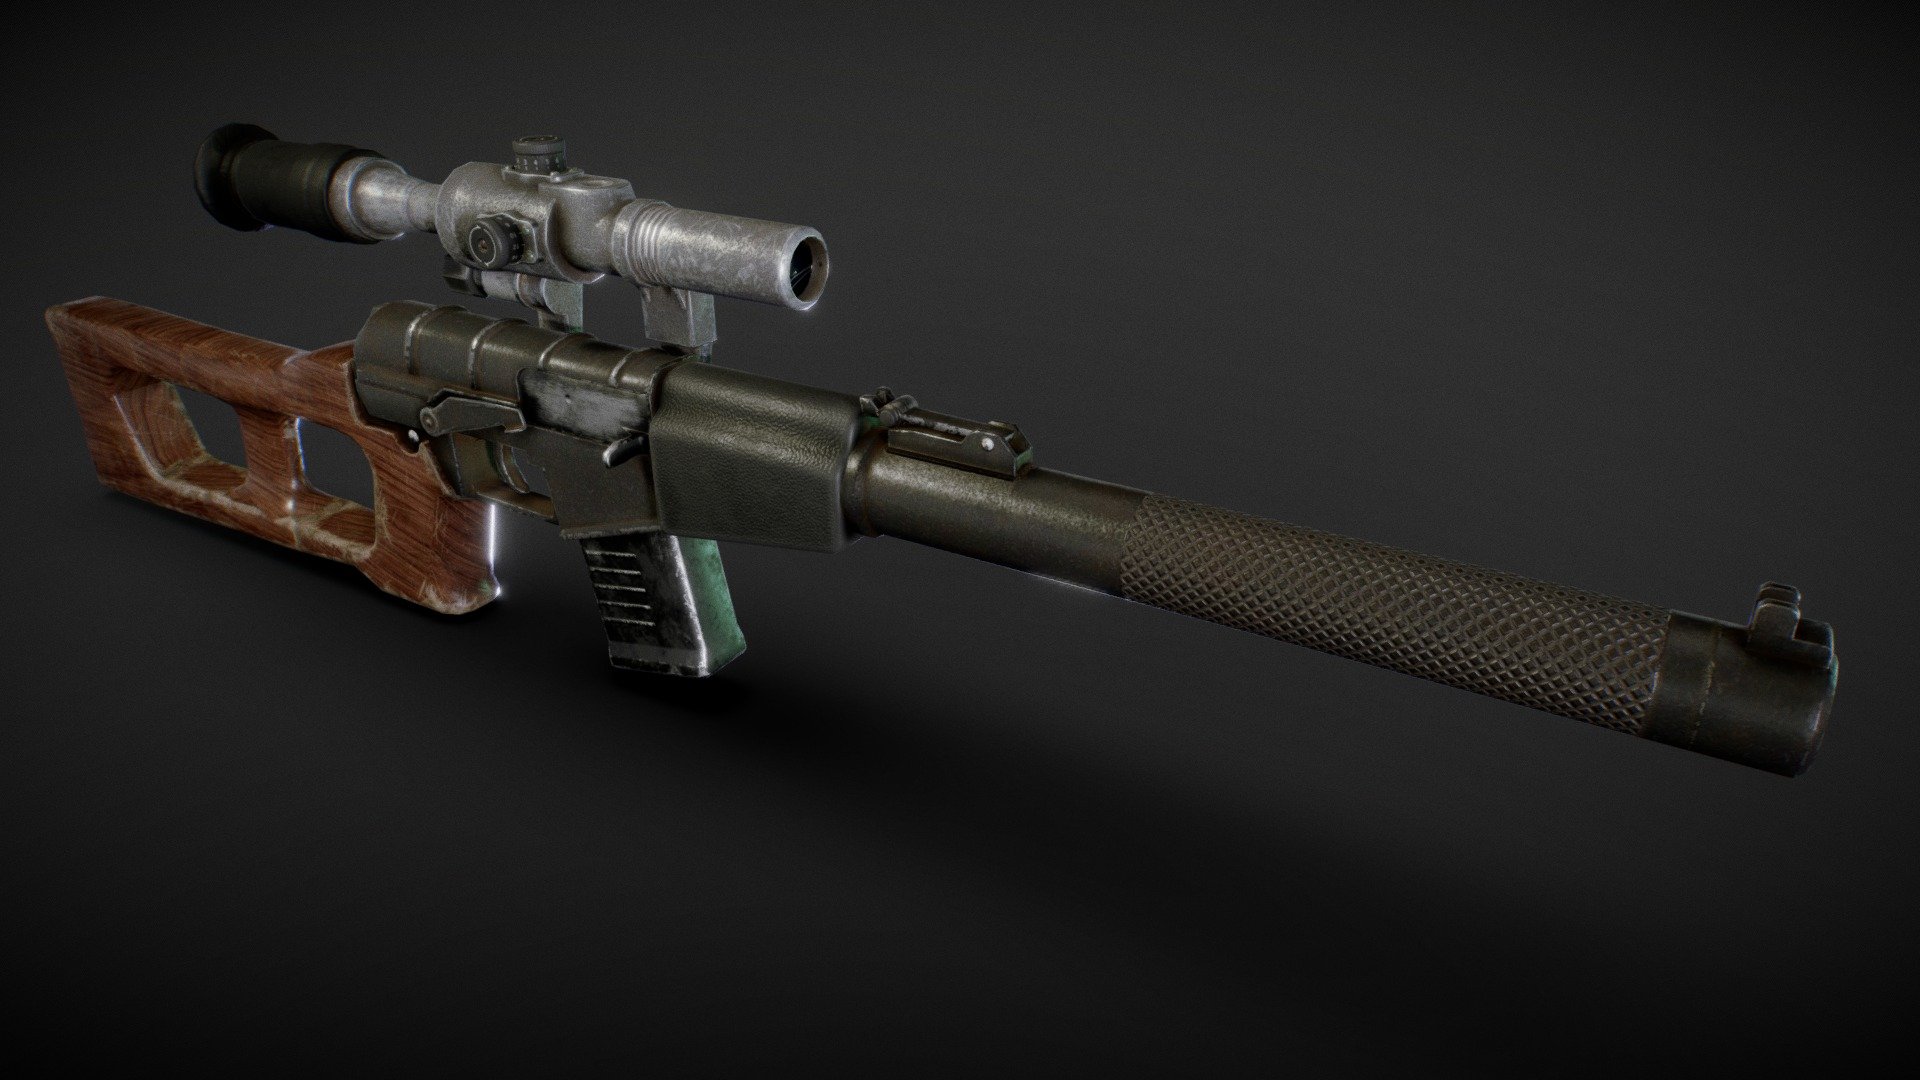 This is a model based on the VSS Vintorez Sniper Rifle. This model is game ready and is excellent for virtual reality with a poly count of just over 7k.

This model has been retextured, the wood now has a much more realistic appearance. There are also several other improvements that have been made to the texture.

This scene is staged at night. Just another silent night time assasination&hellip; - VSS Vintorez (2.0) - Buy Royalty Free 3D model by creationwasteland 3d model